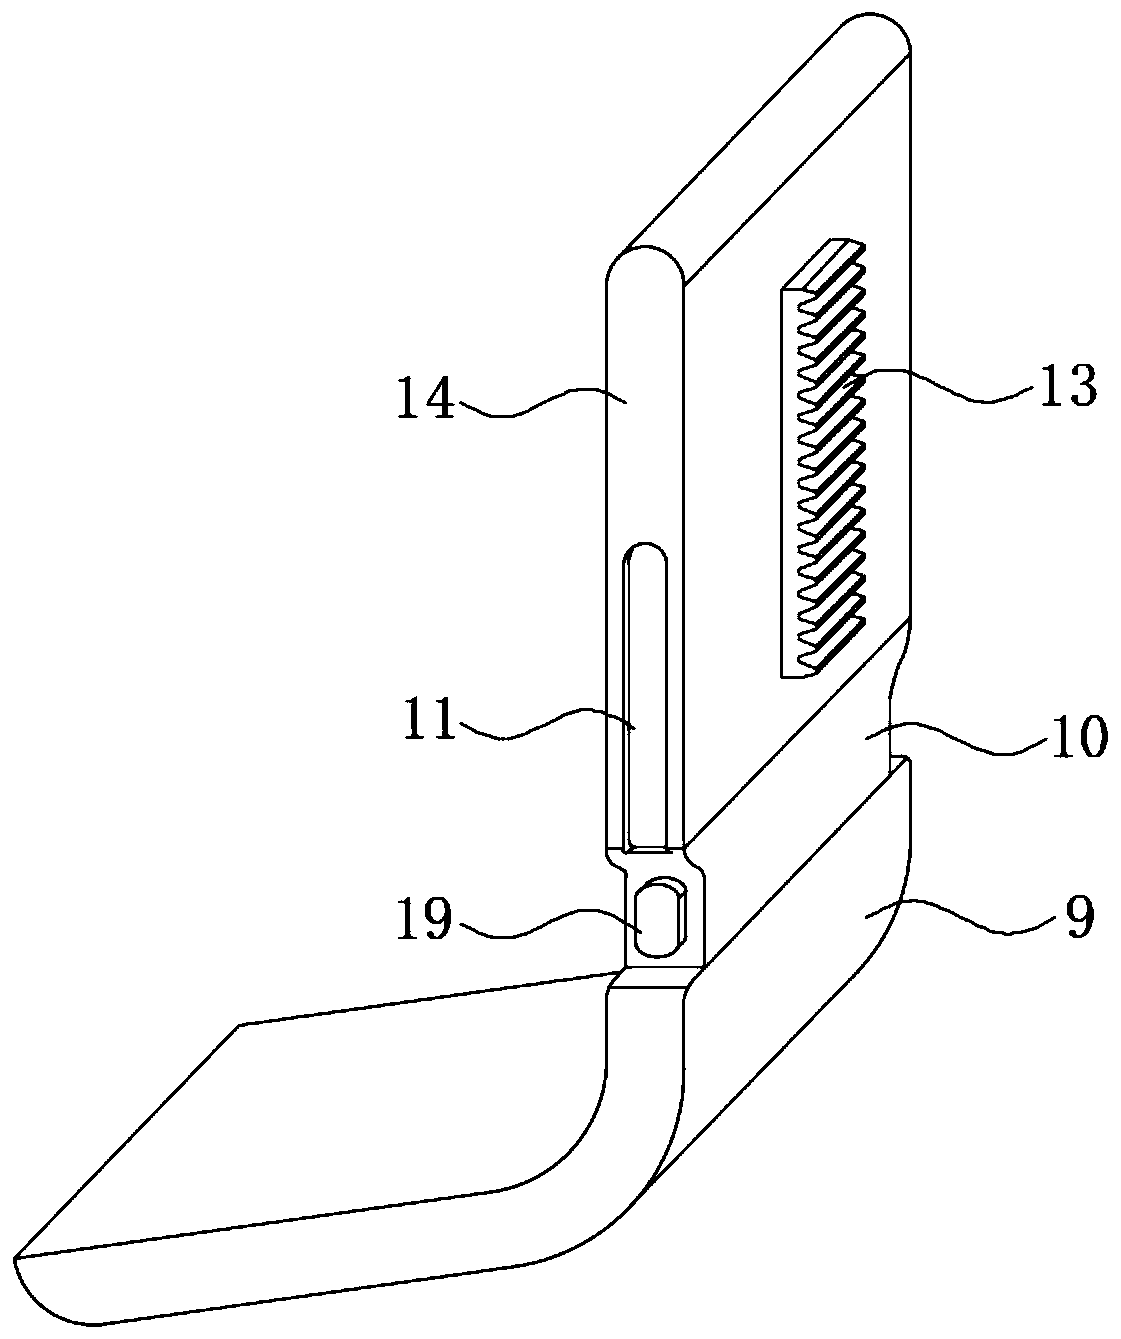 Cloth hemming and shaping device